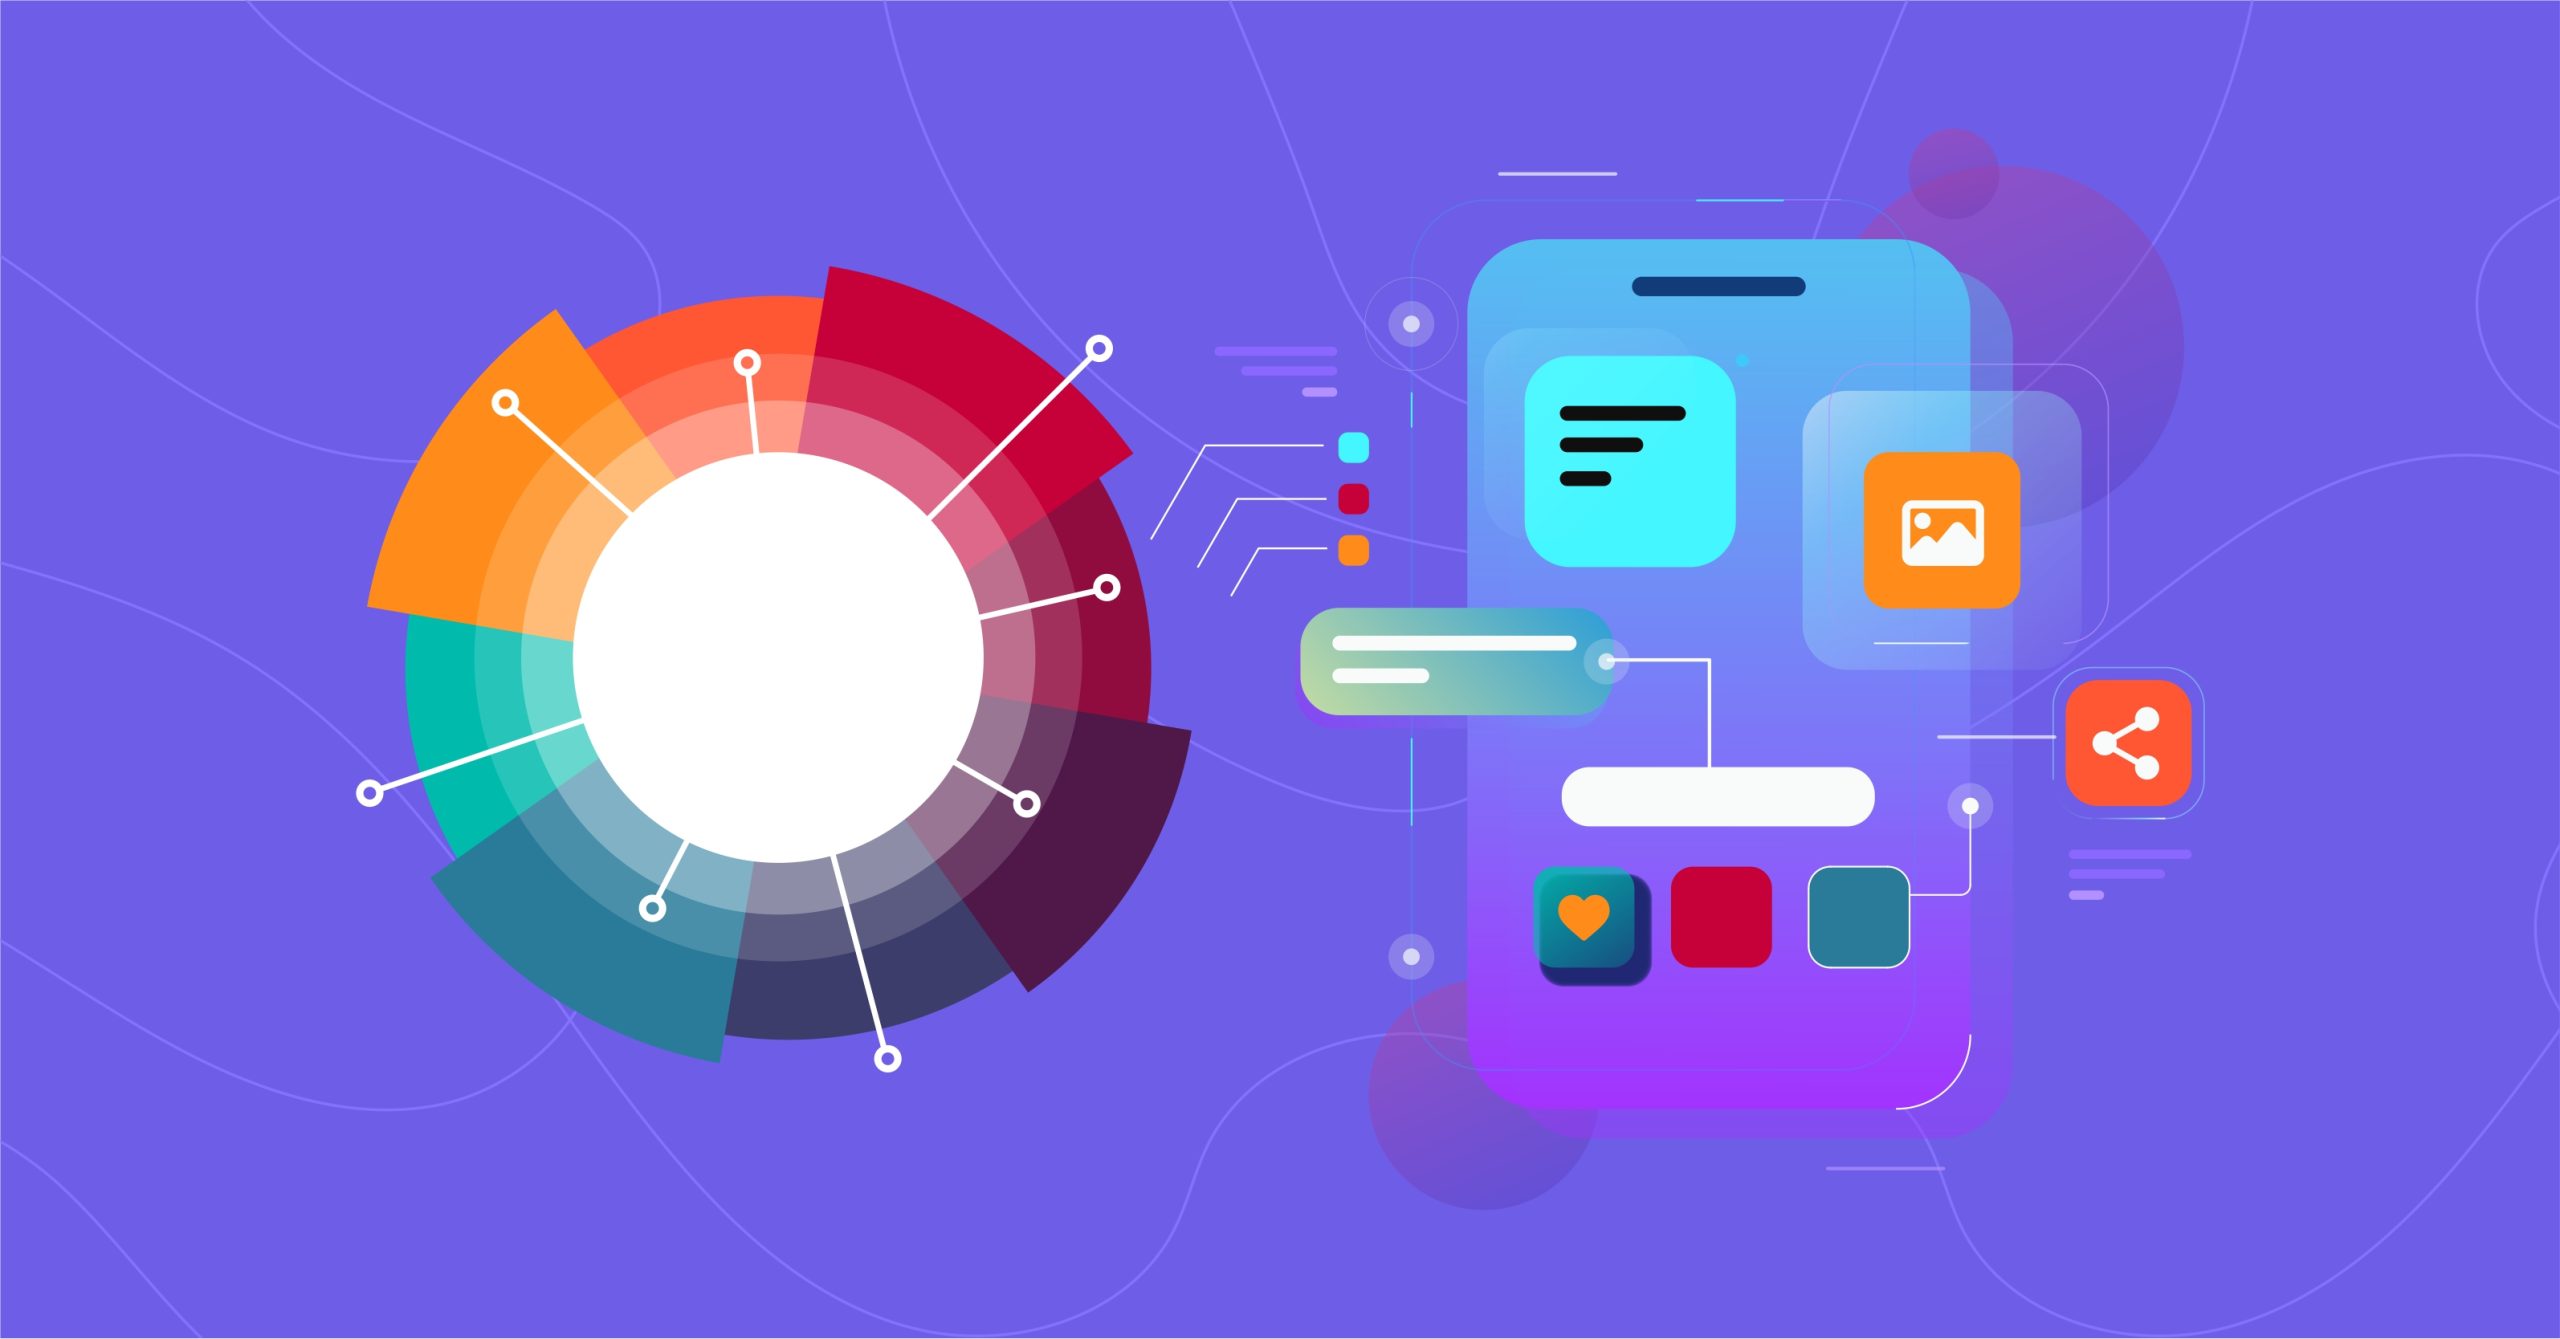 Understanding Color Theory and Its Impact in UI/UX Design